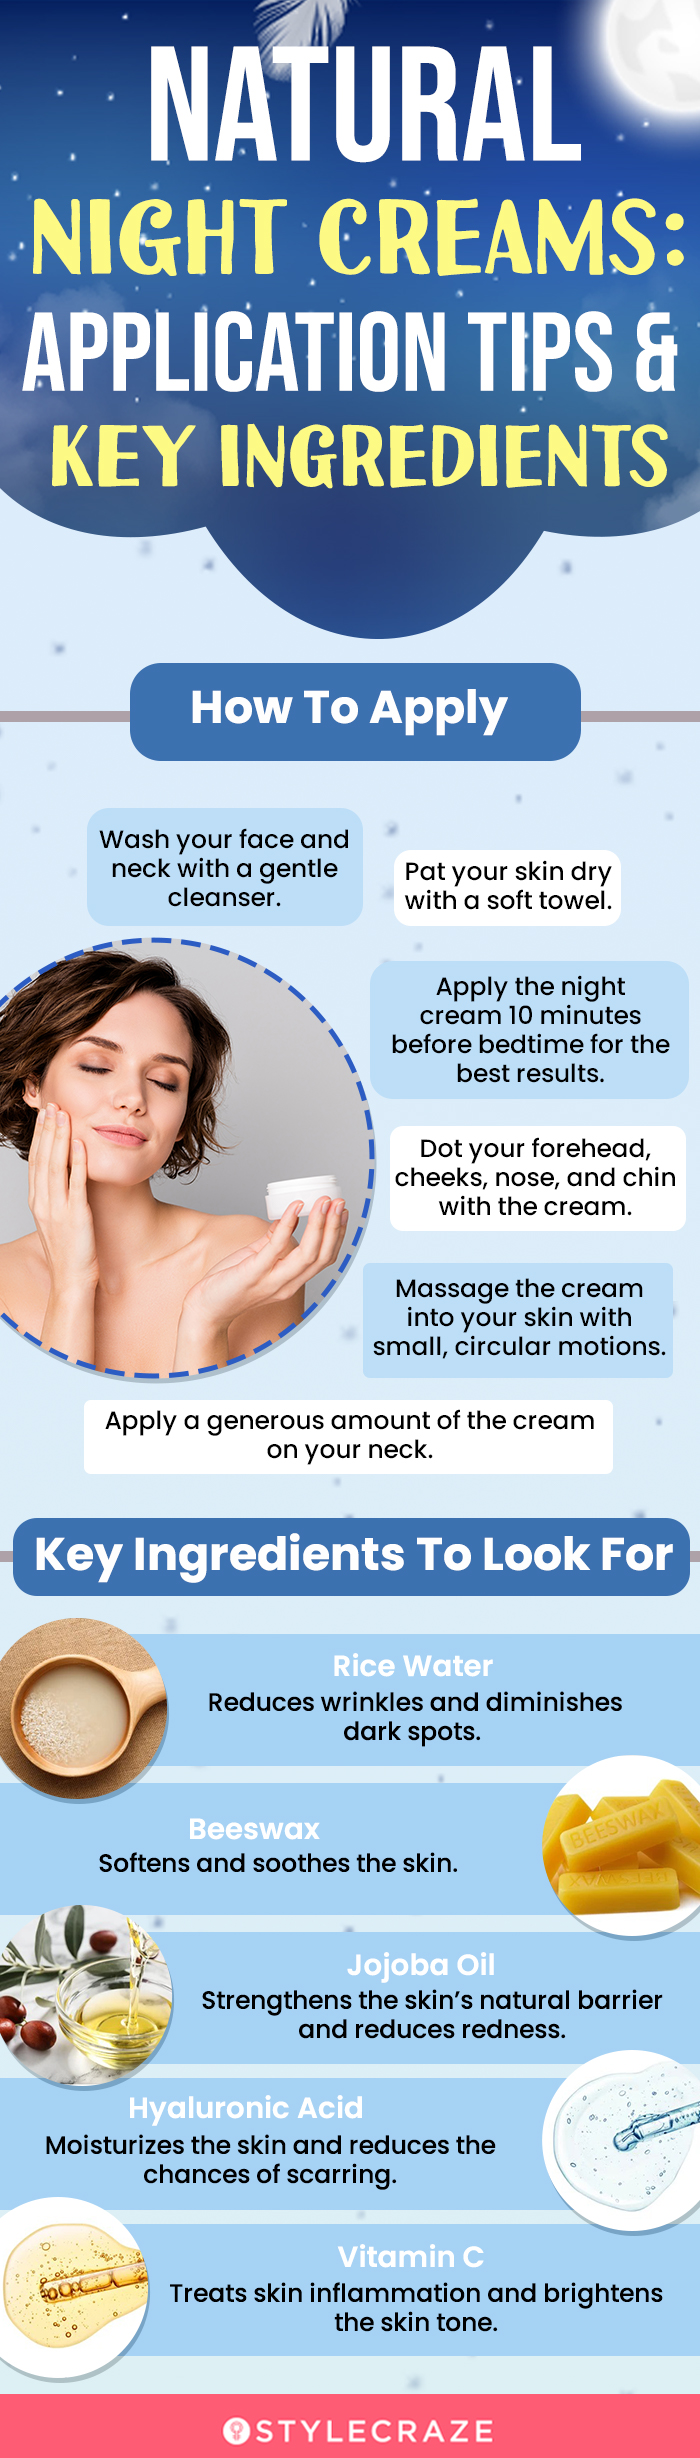 Natural Night Creams: Application Tips & Key Ingredients (infographic)